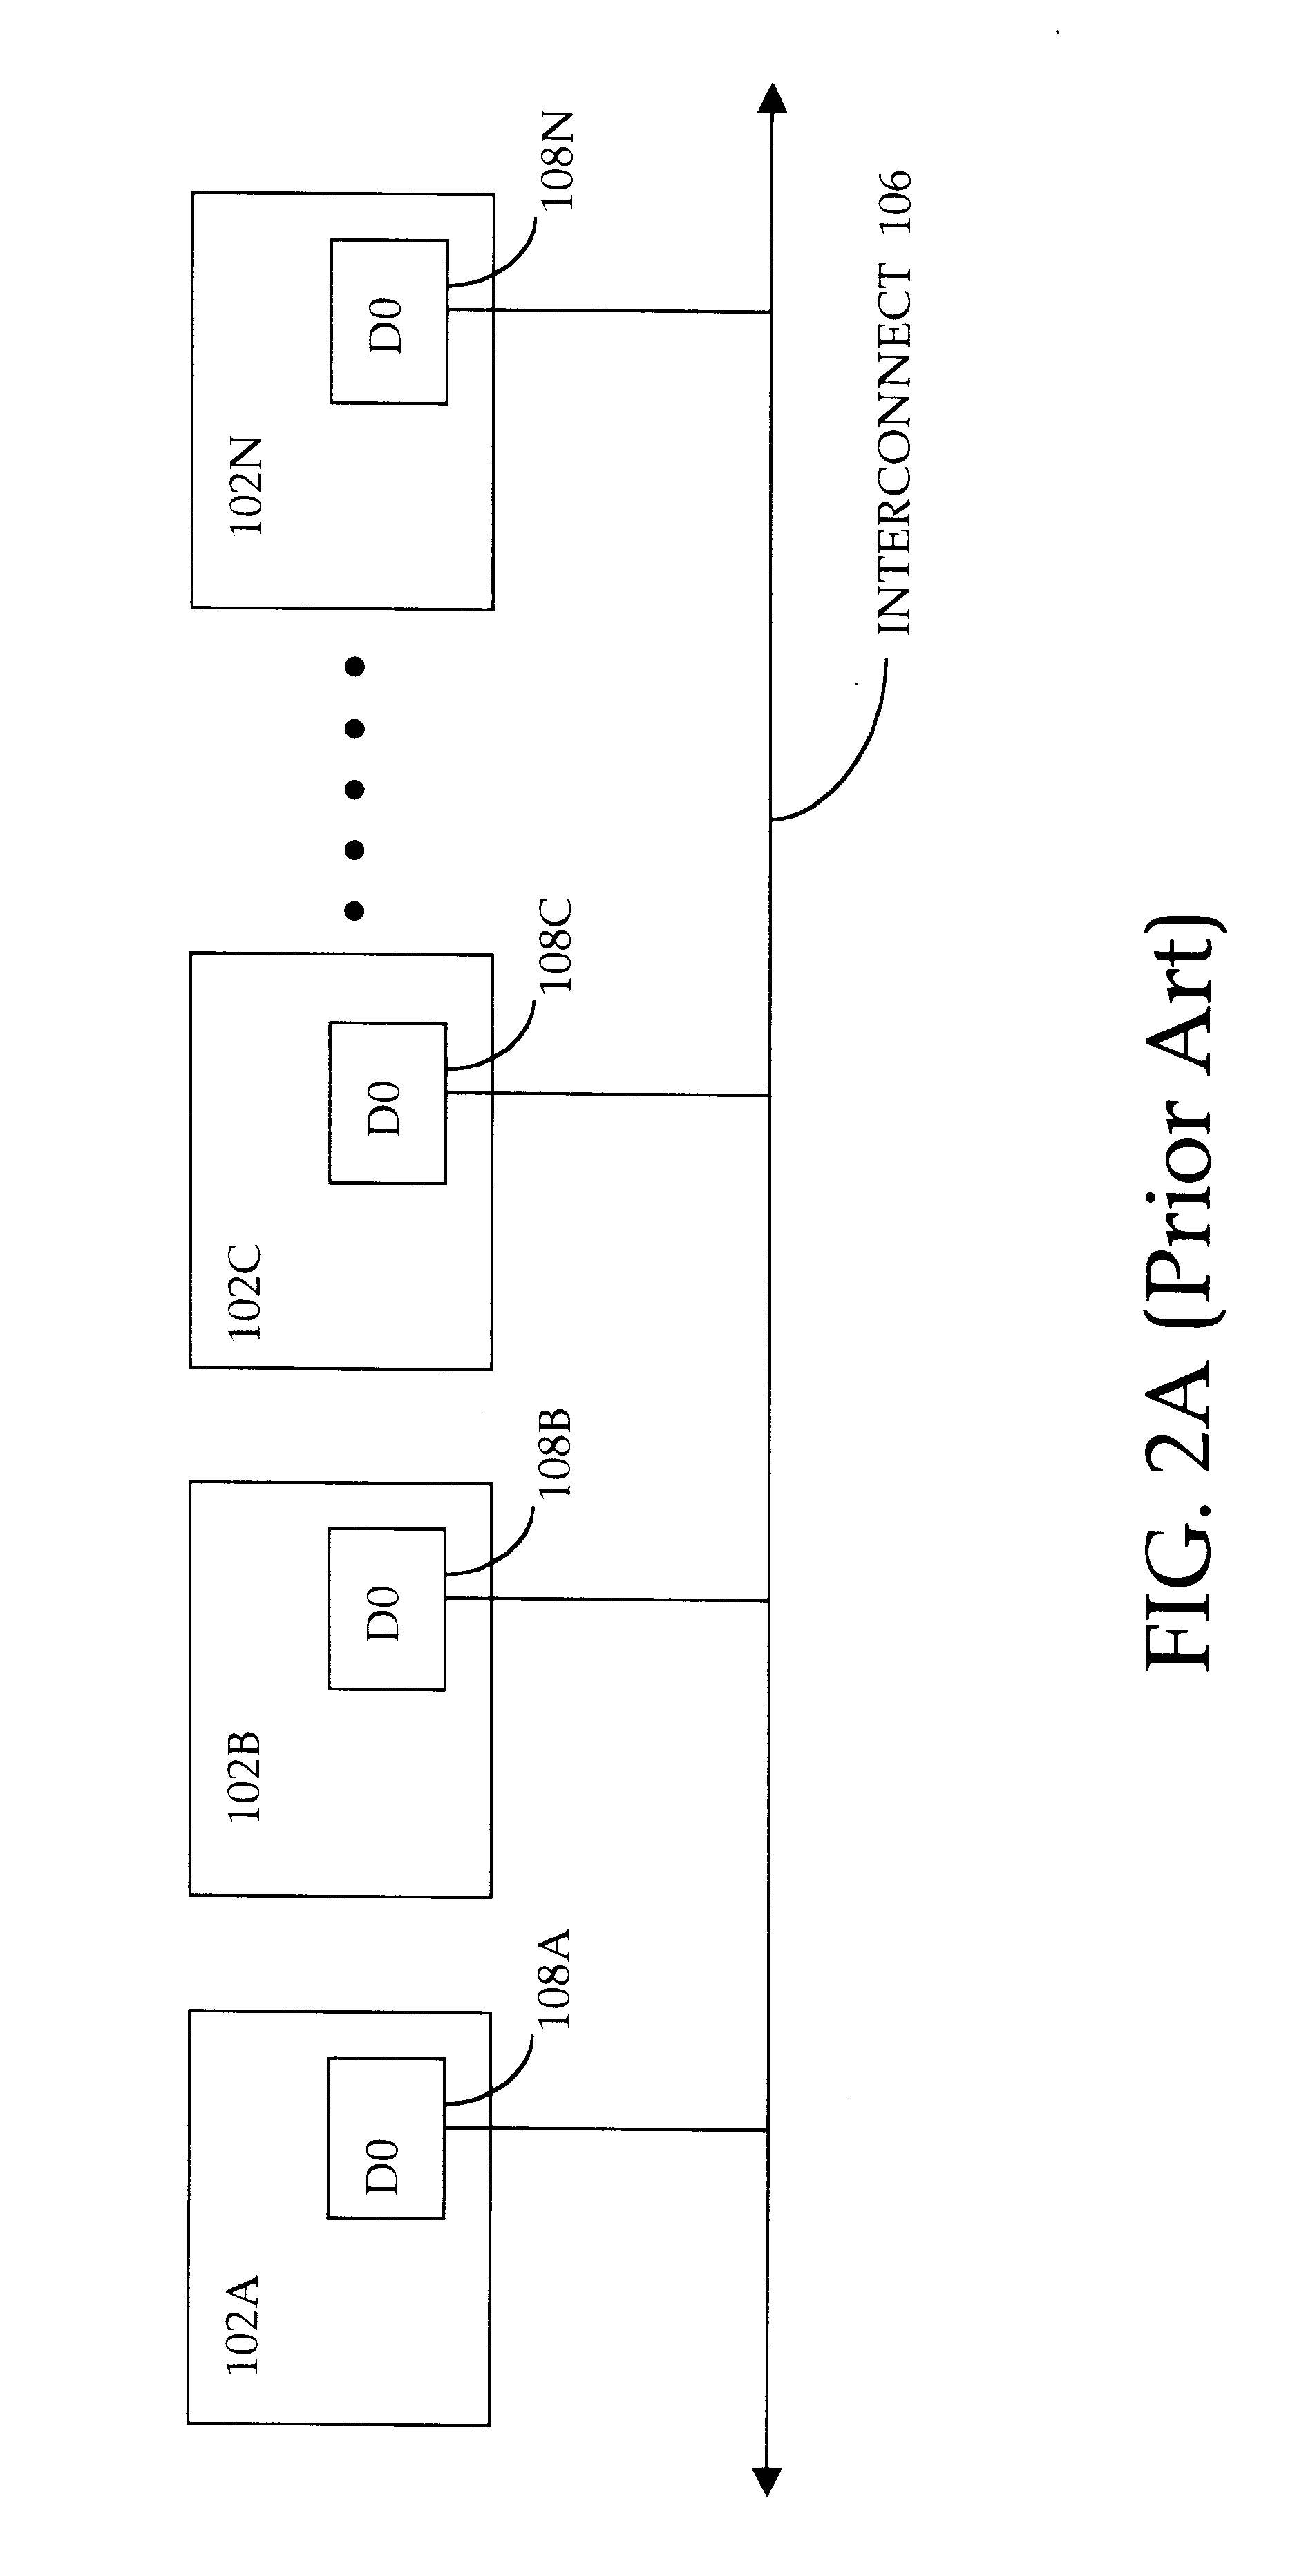 System and method for deleting read-only head entries in multi-processor computer systems supporting cache coherence with mixed protocols